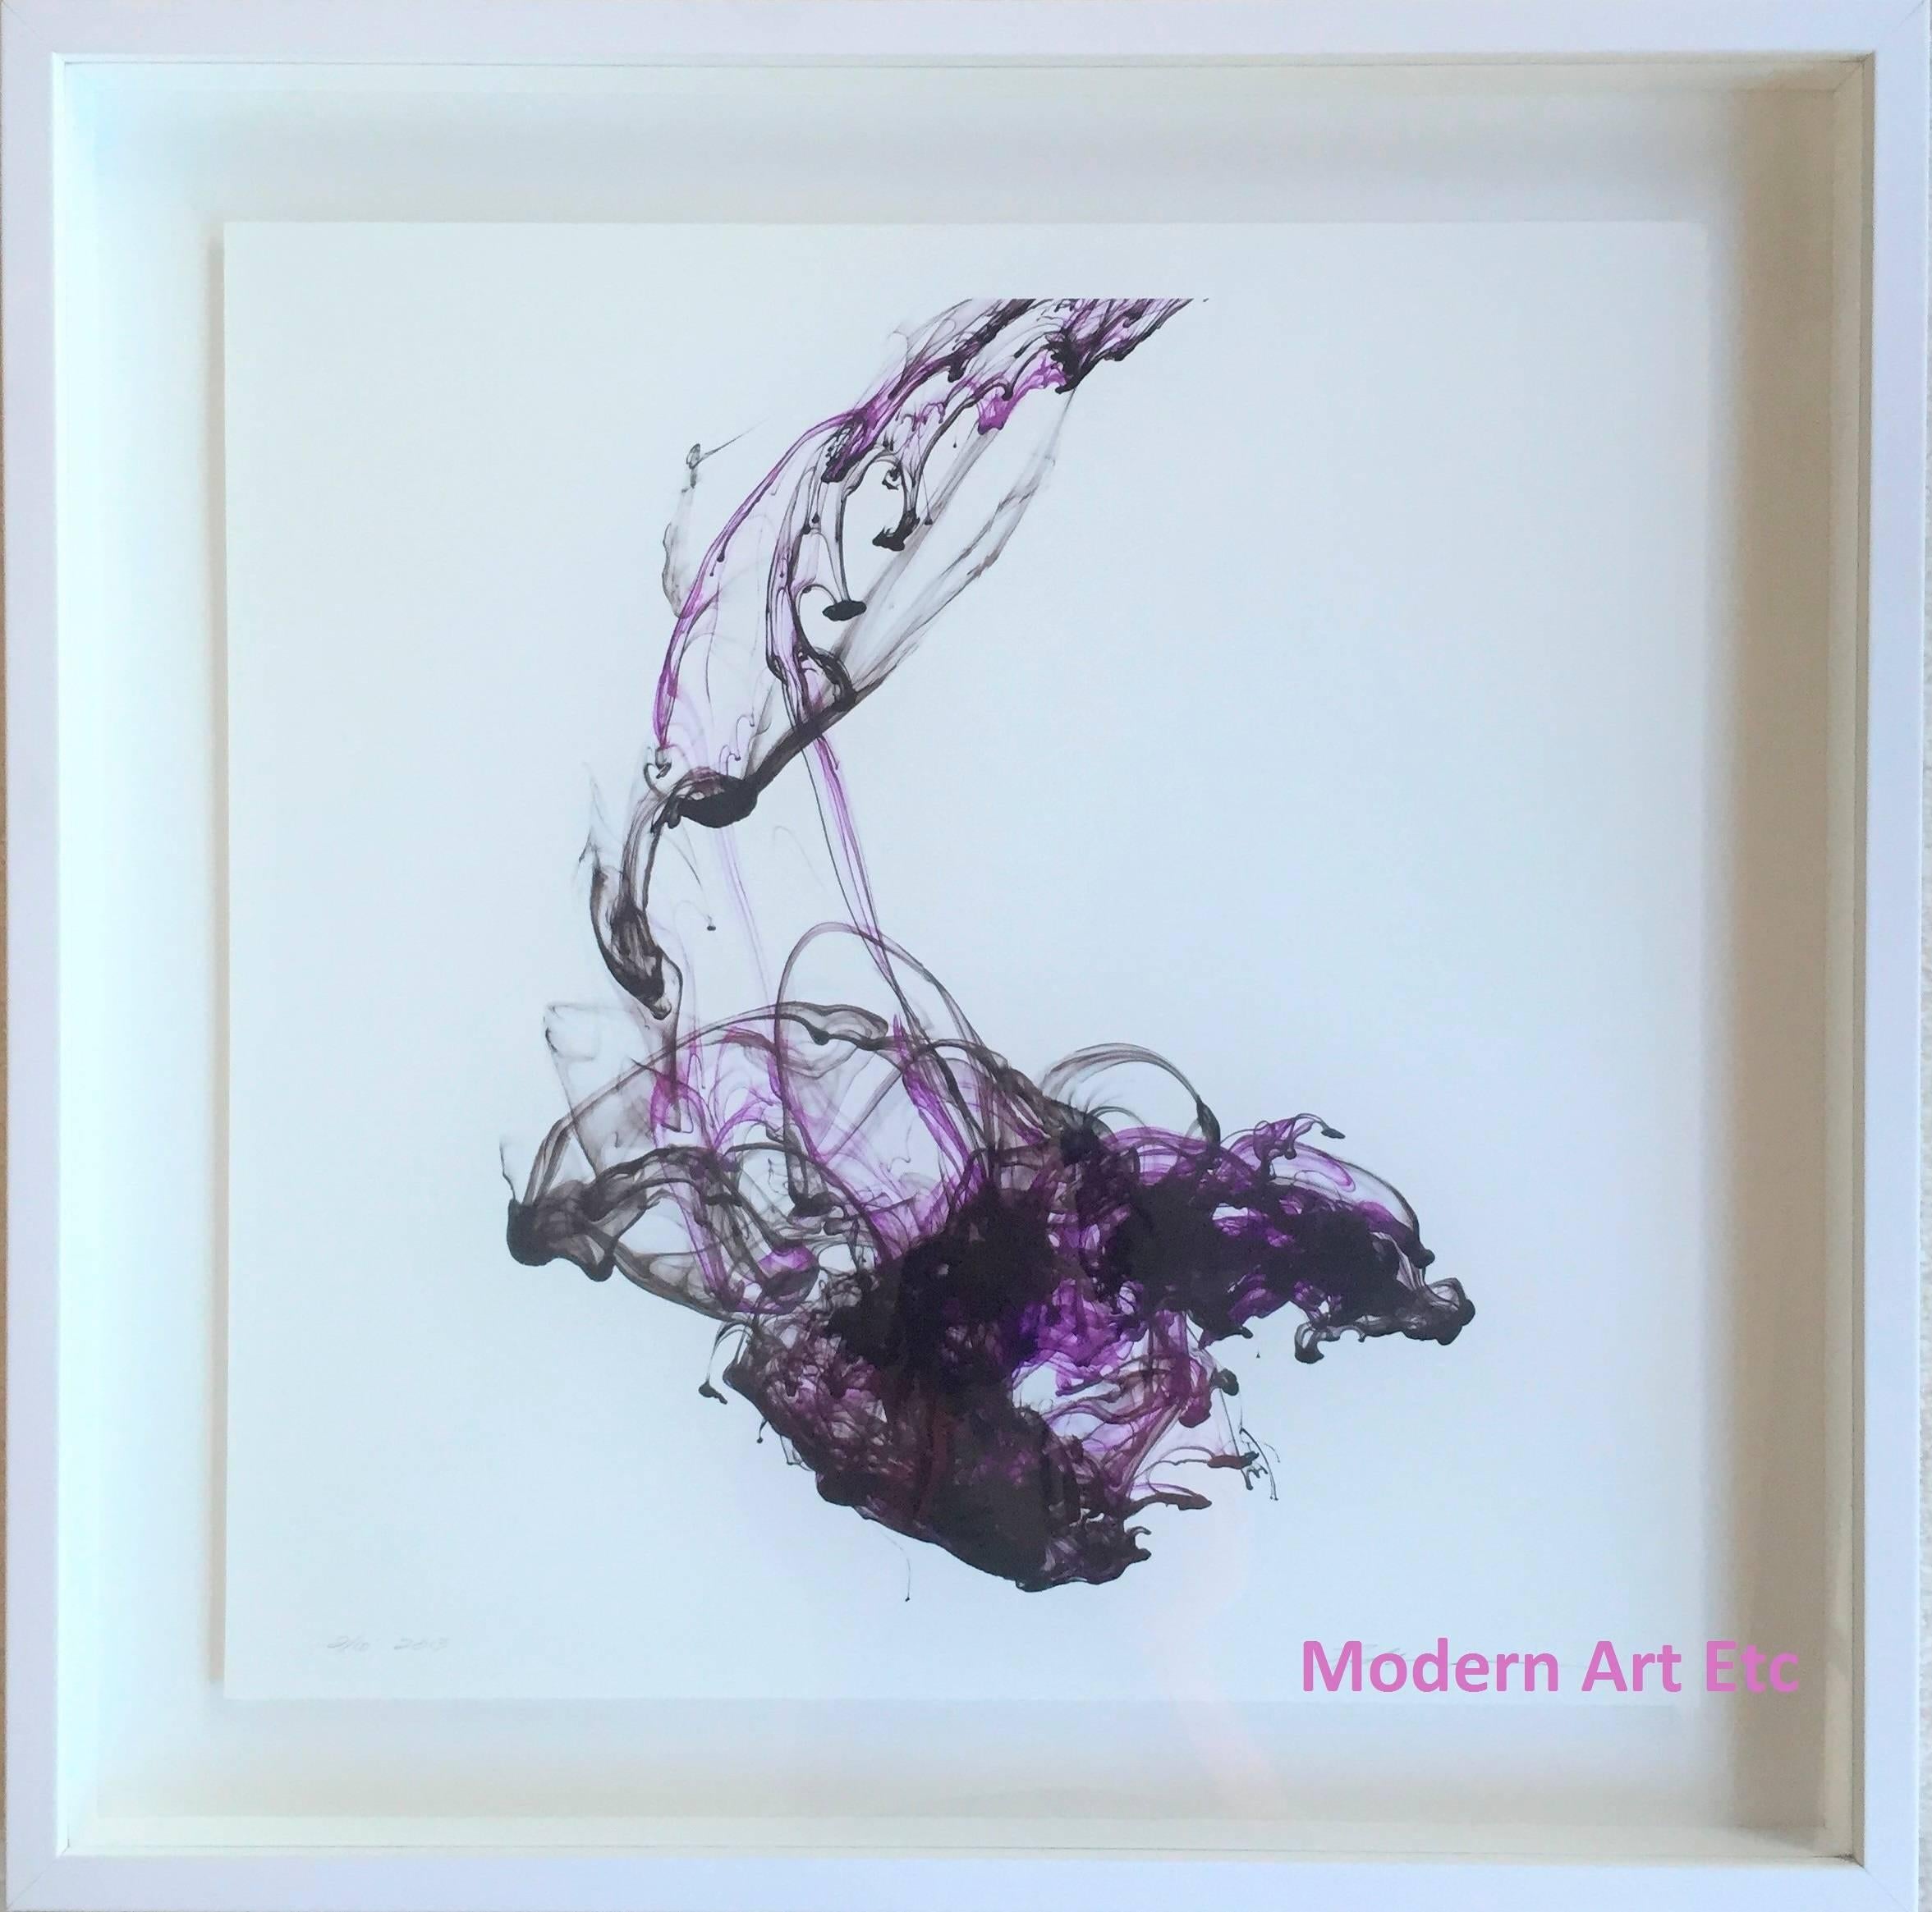 MAE Curates Abstract Photograph - Abstract art photography - Fluidity in Color Series - Purple Reign -sold framed